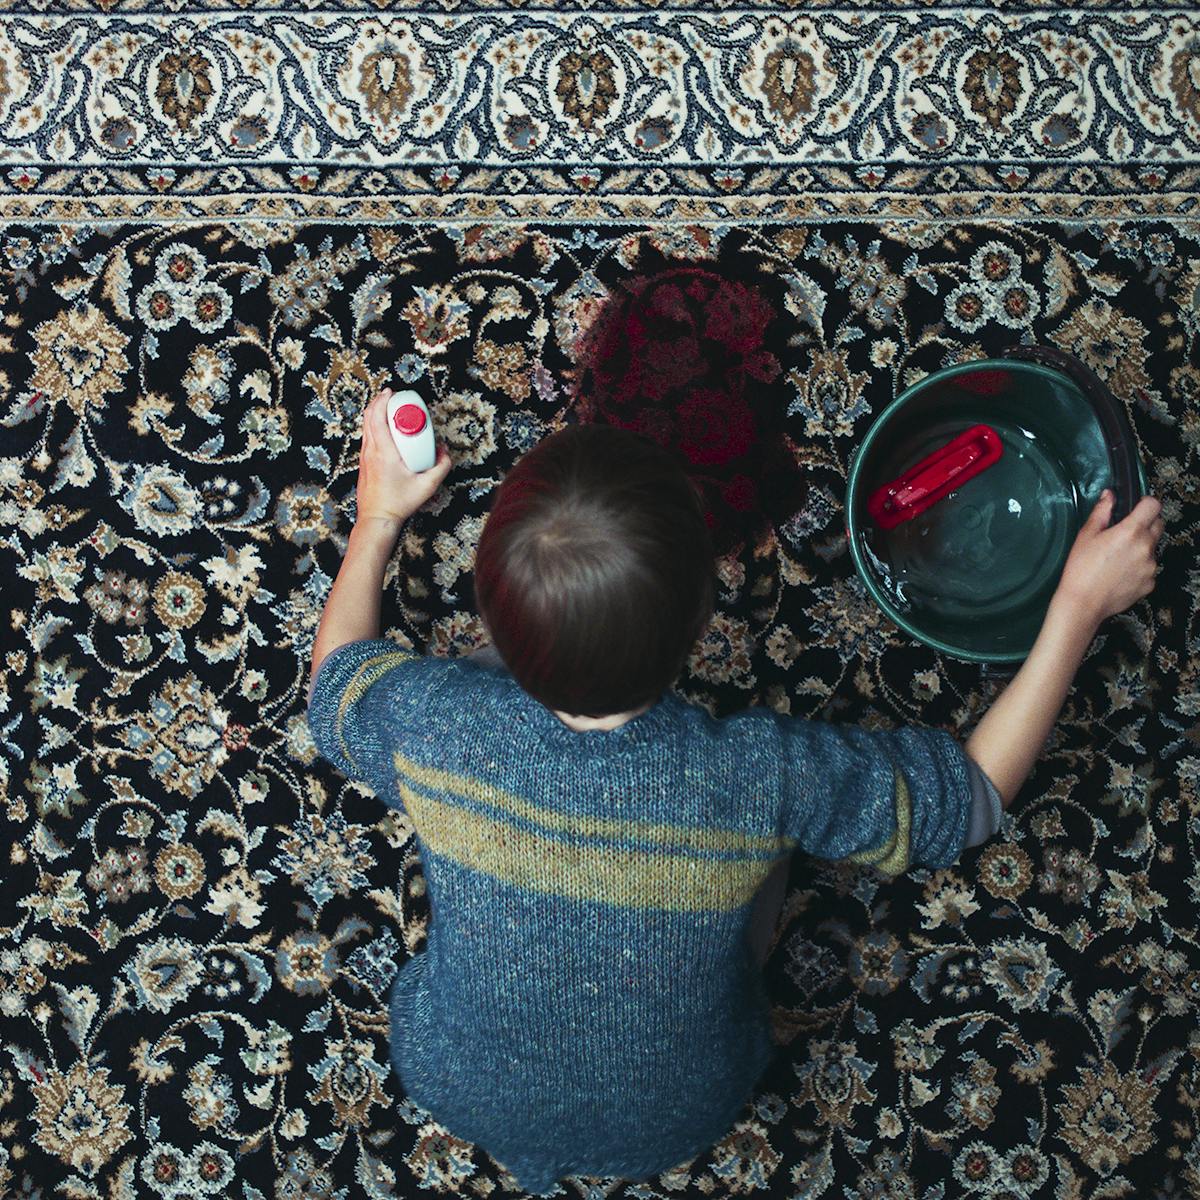 Jonathan (Sammy Schrein) cleans up a blood stain on an patterned rug.